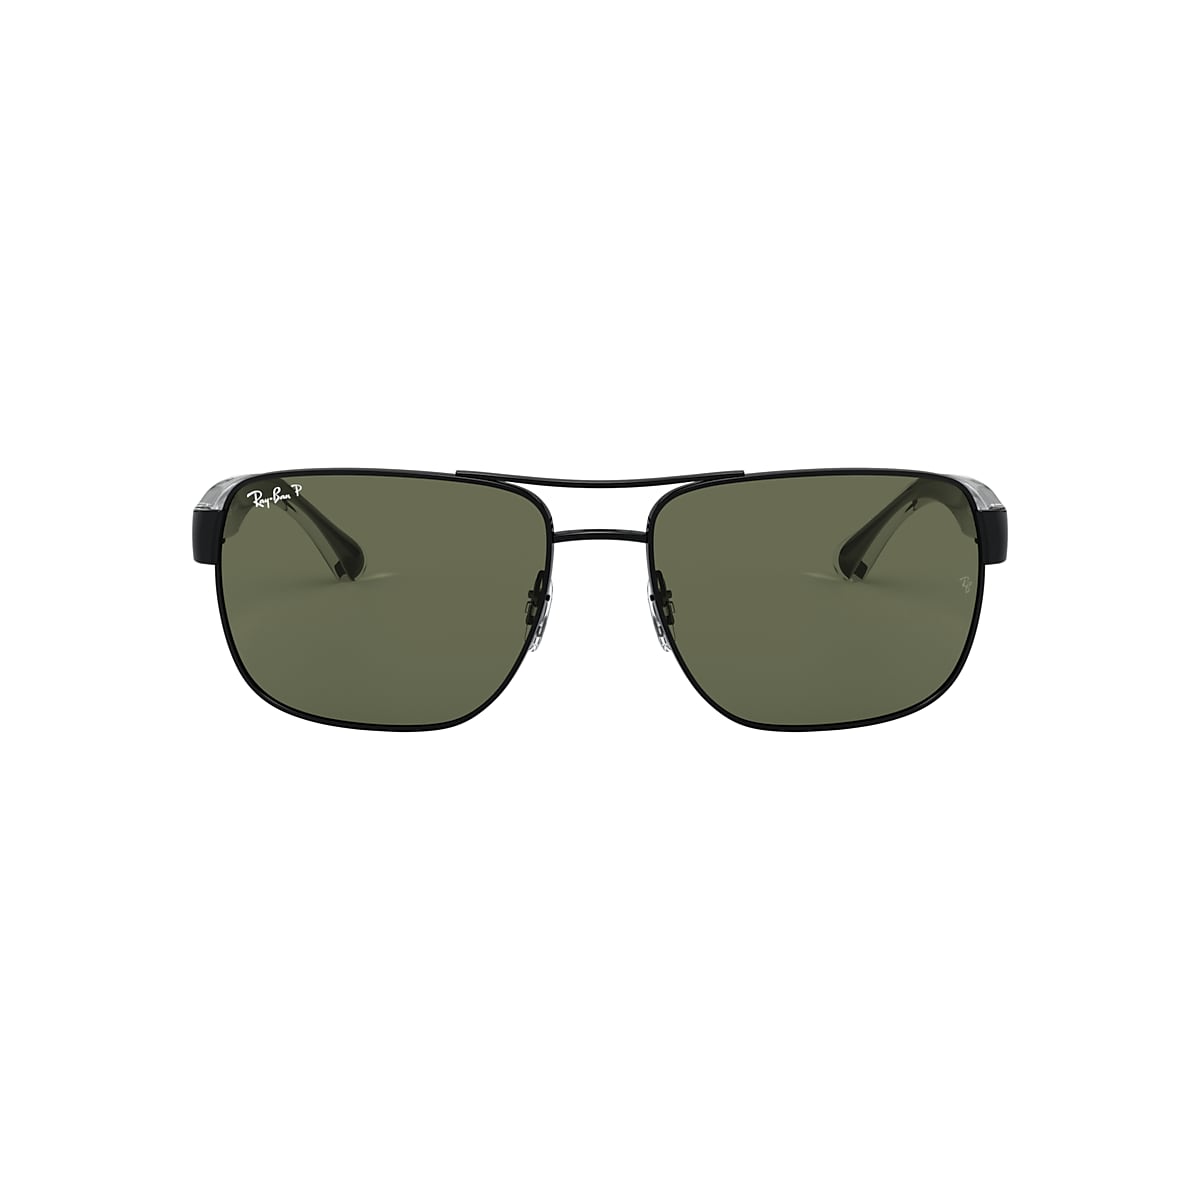 Best Selling RB Sunglass for Men  Ryaban sunglass H230 – Fast